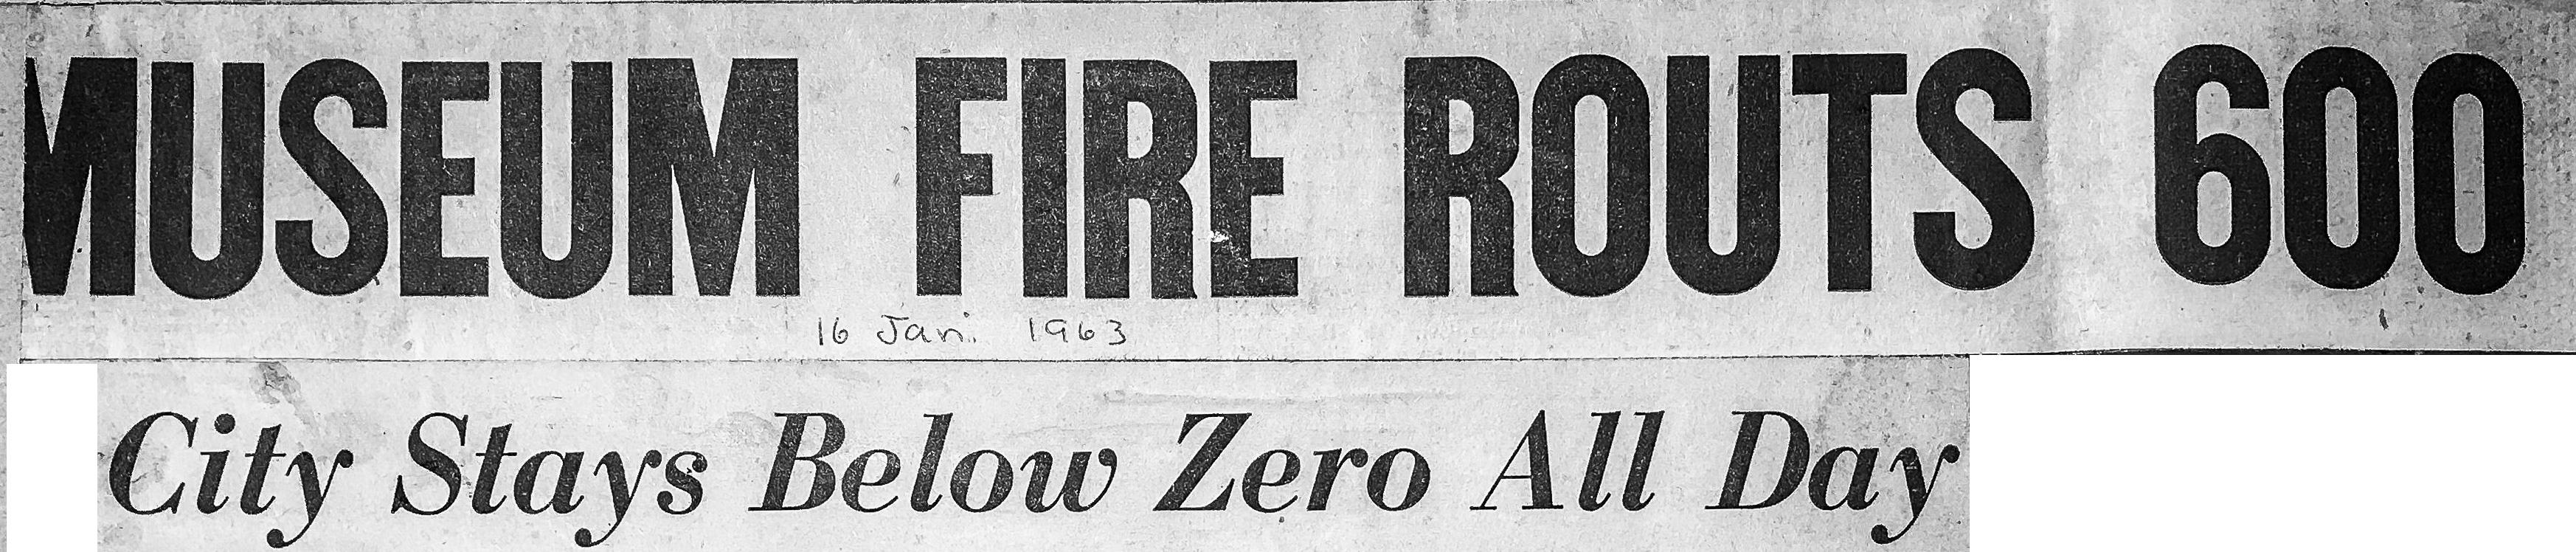 vintage news clipping of Chicago Fire Department history, a 3-11 Alarm fire at the Museum of Science and Industry in 1963